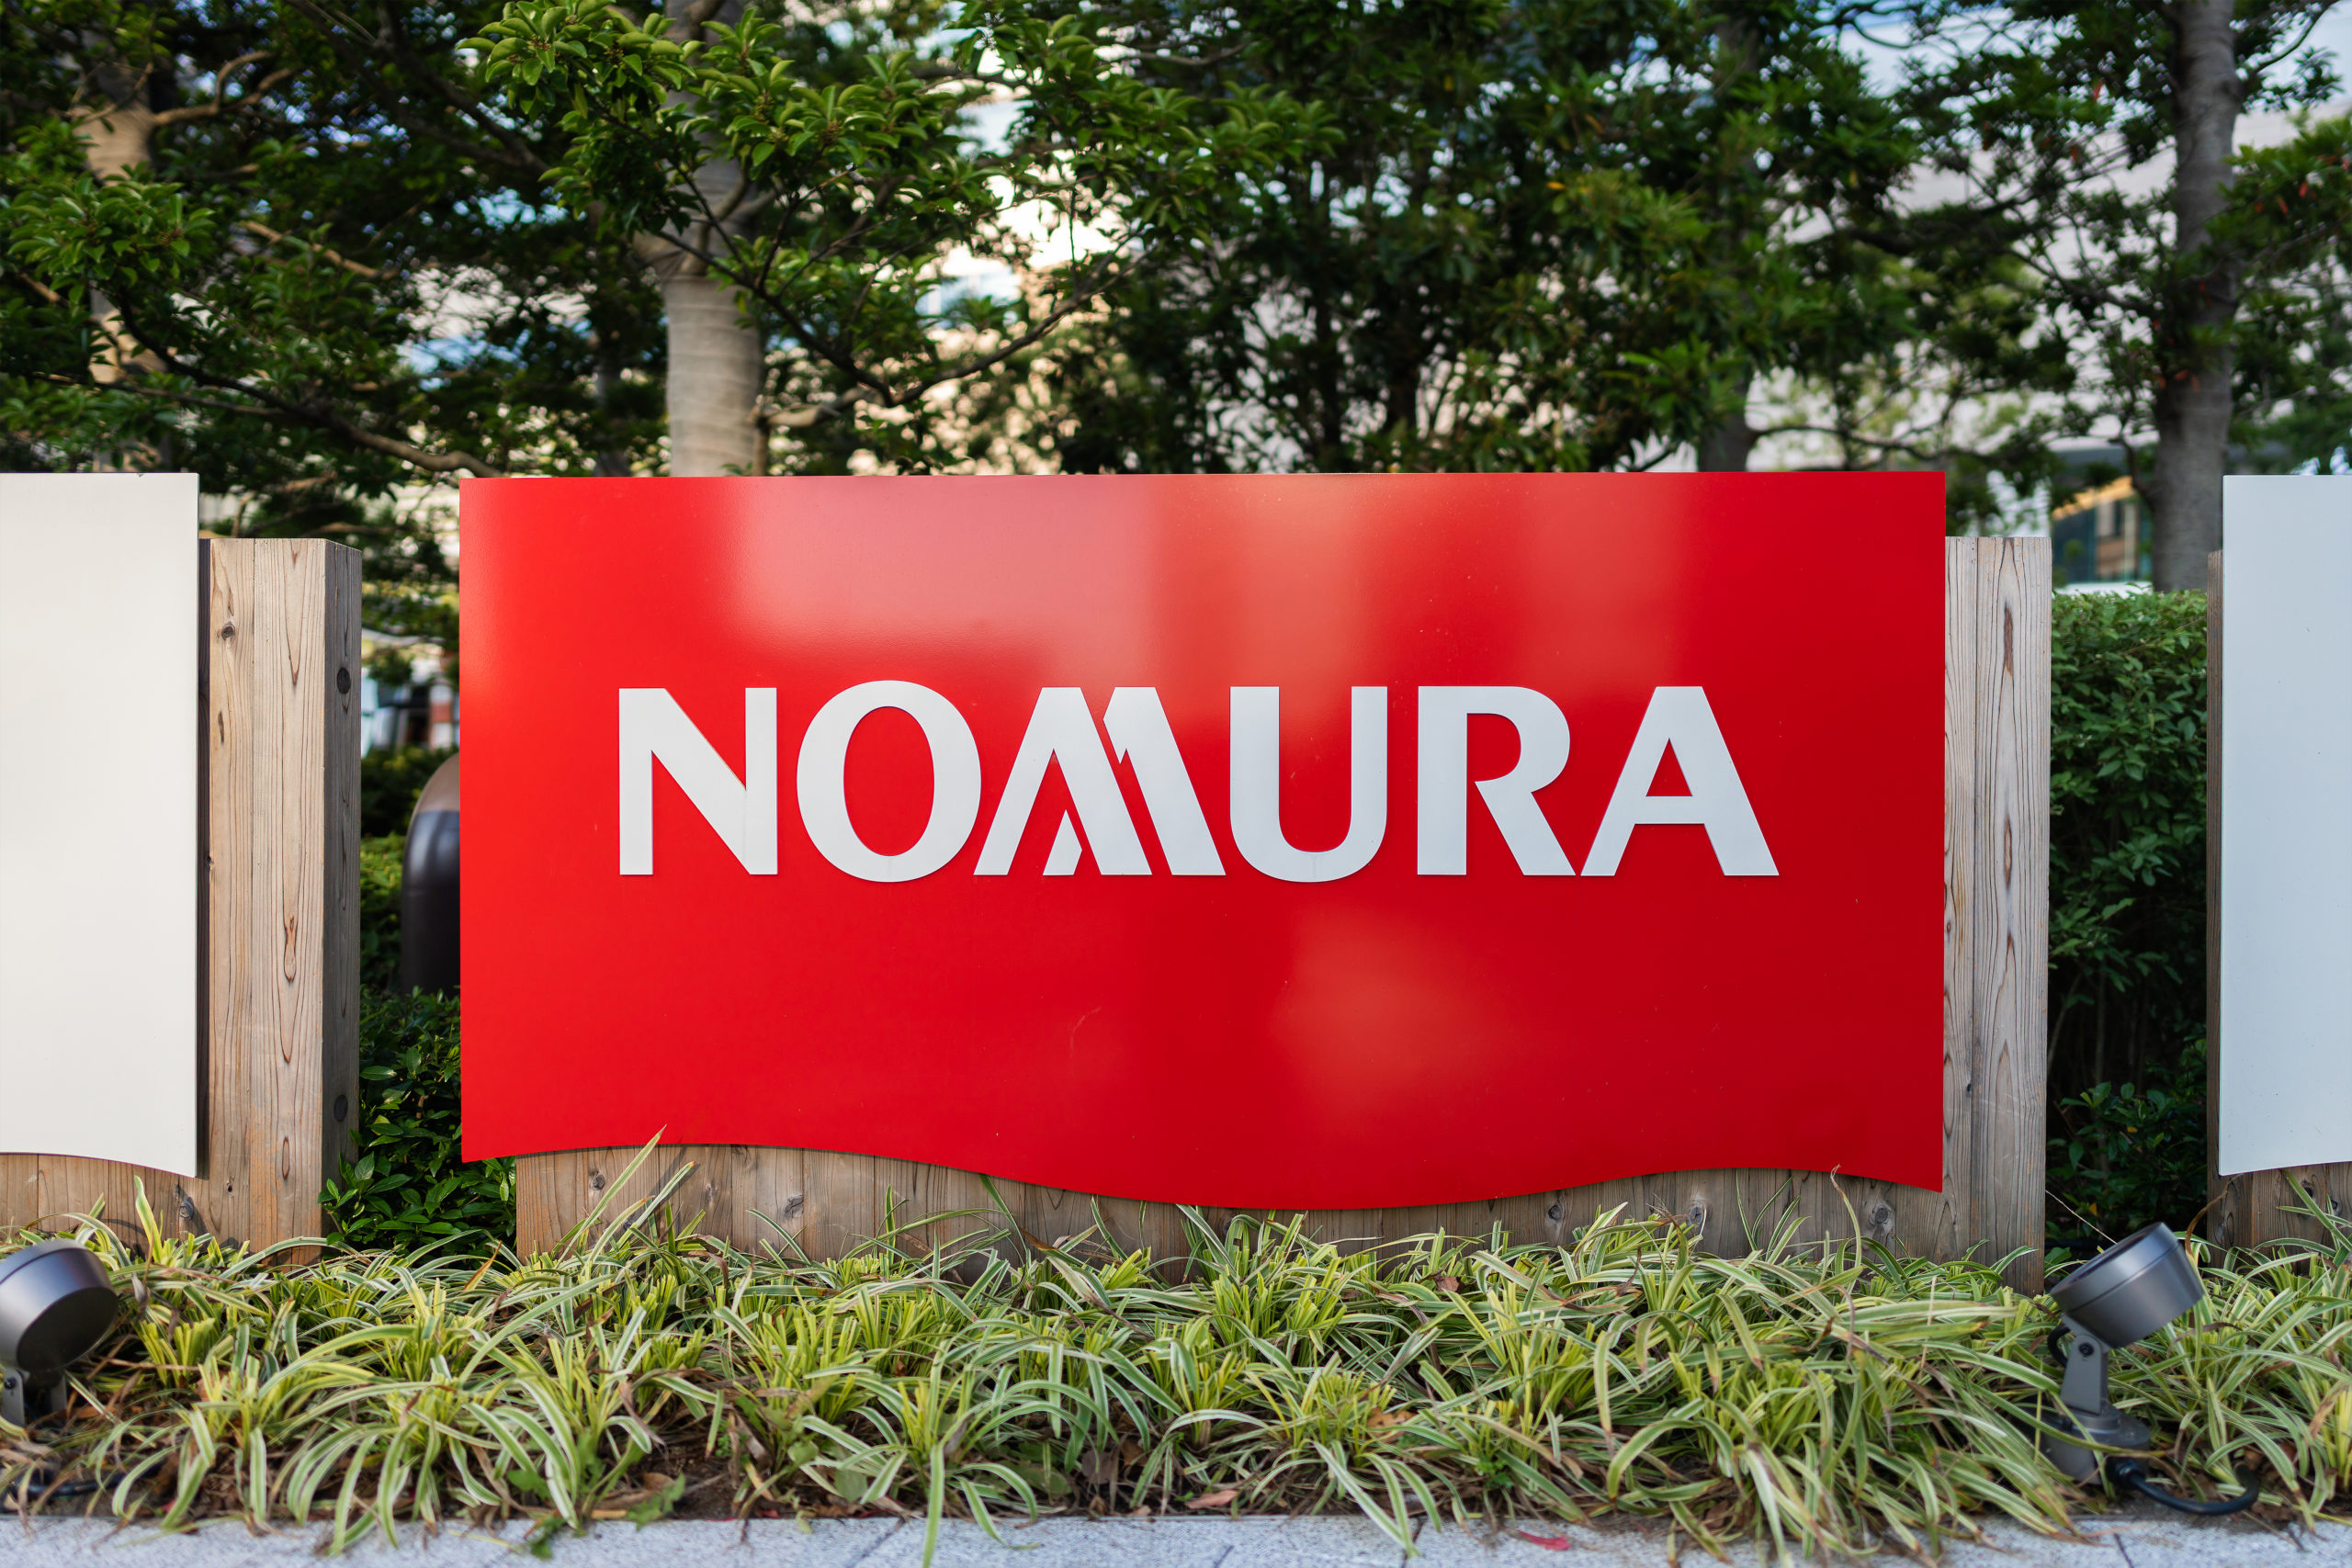 Japan’s largest investment bank Nomura to launch crypto arm, FT reports